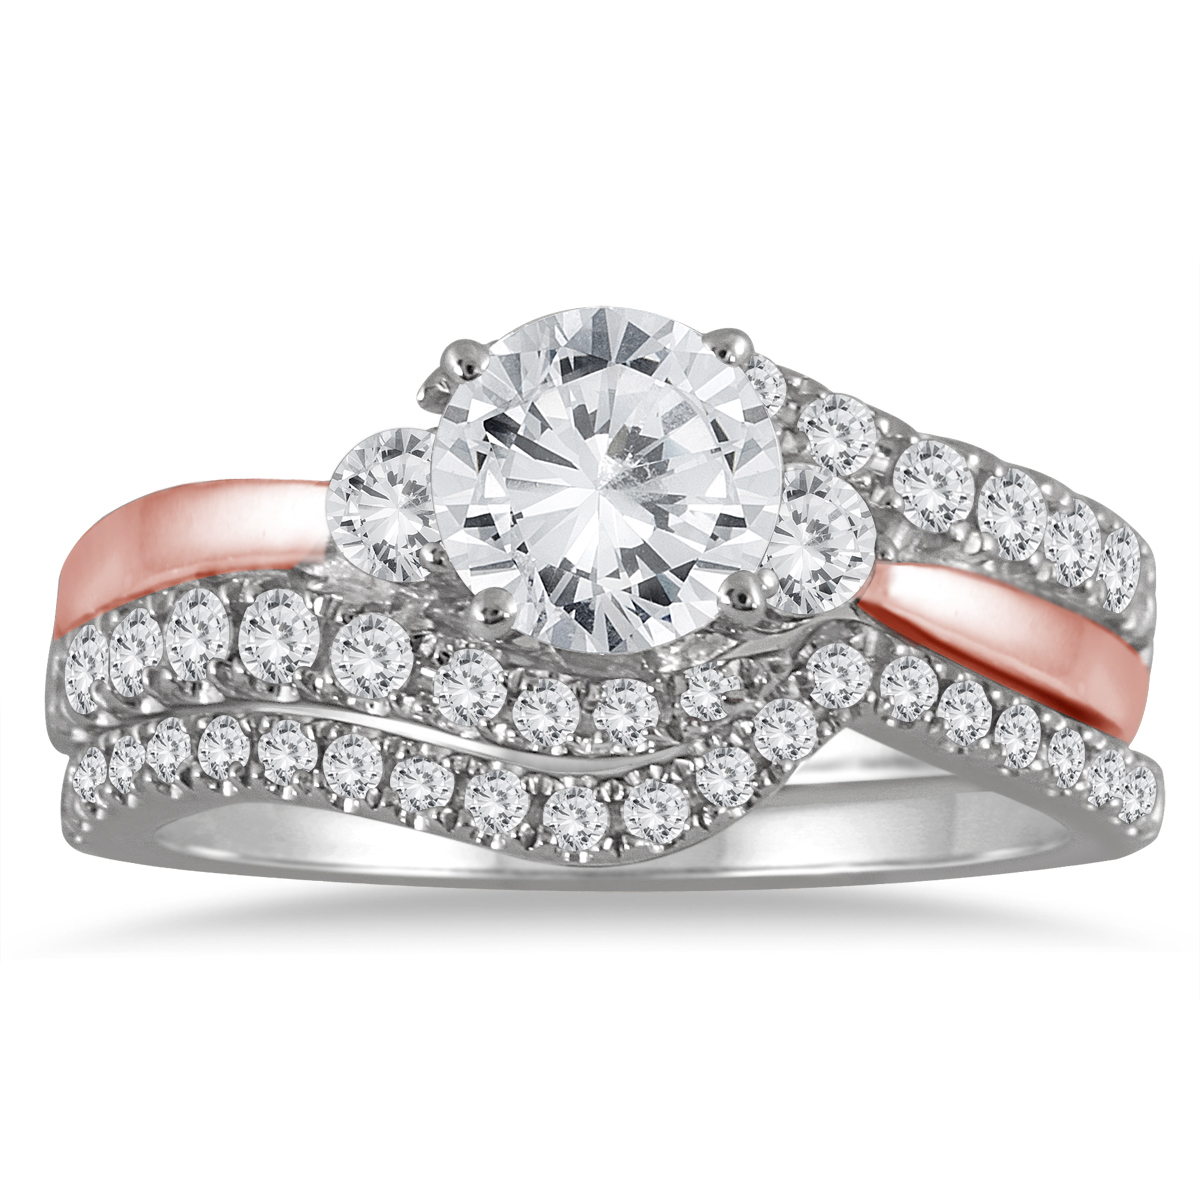 Image of AGS Certified 1 1/2 Carat TW Diamond Bridal Set in Two Toned 14K Pink and White Gold (J-K Color I2-I3 Clarity)